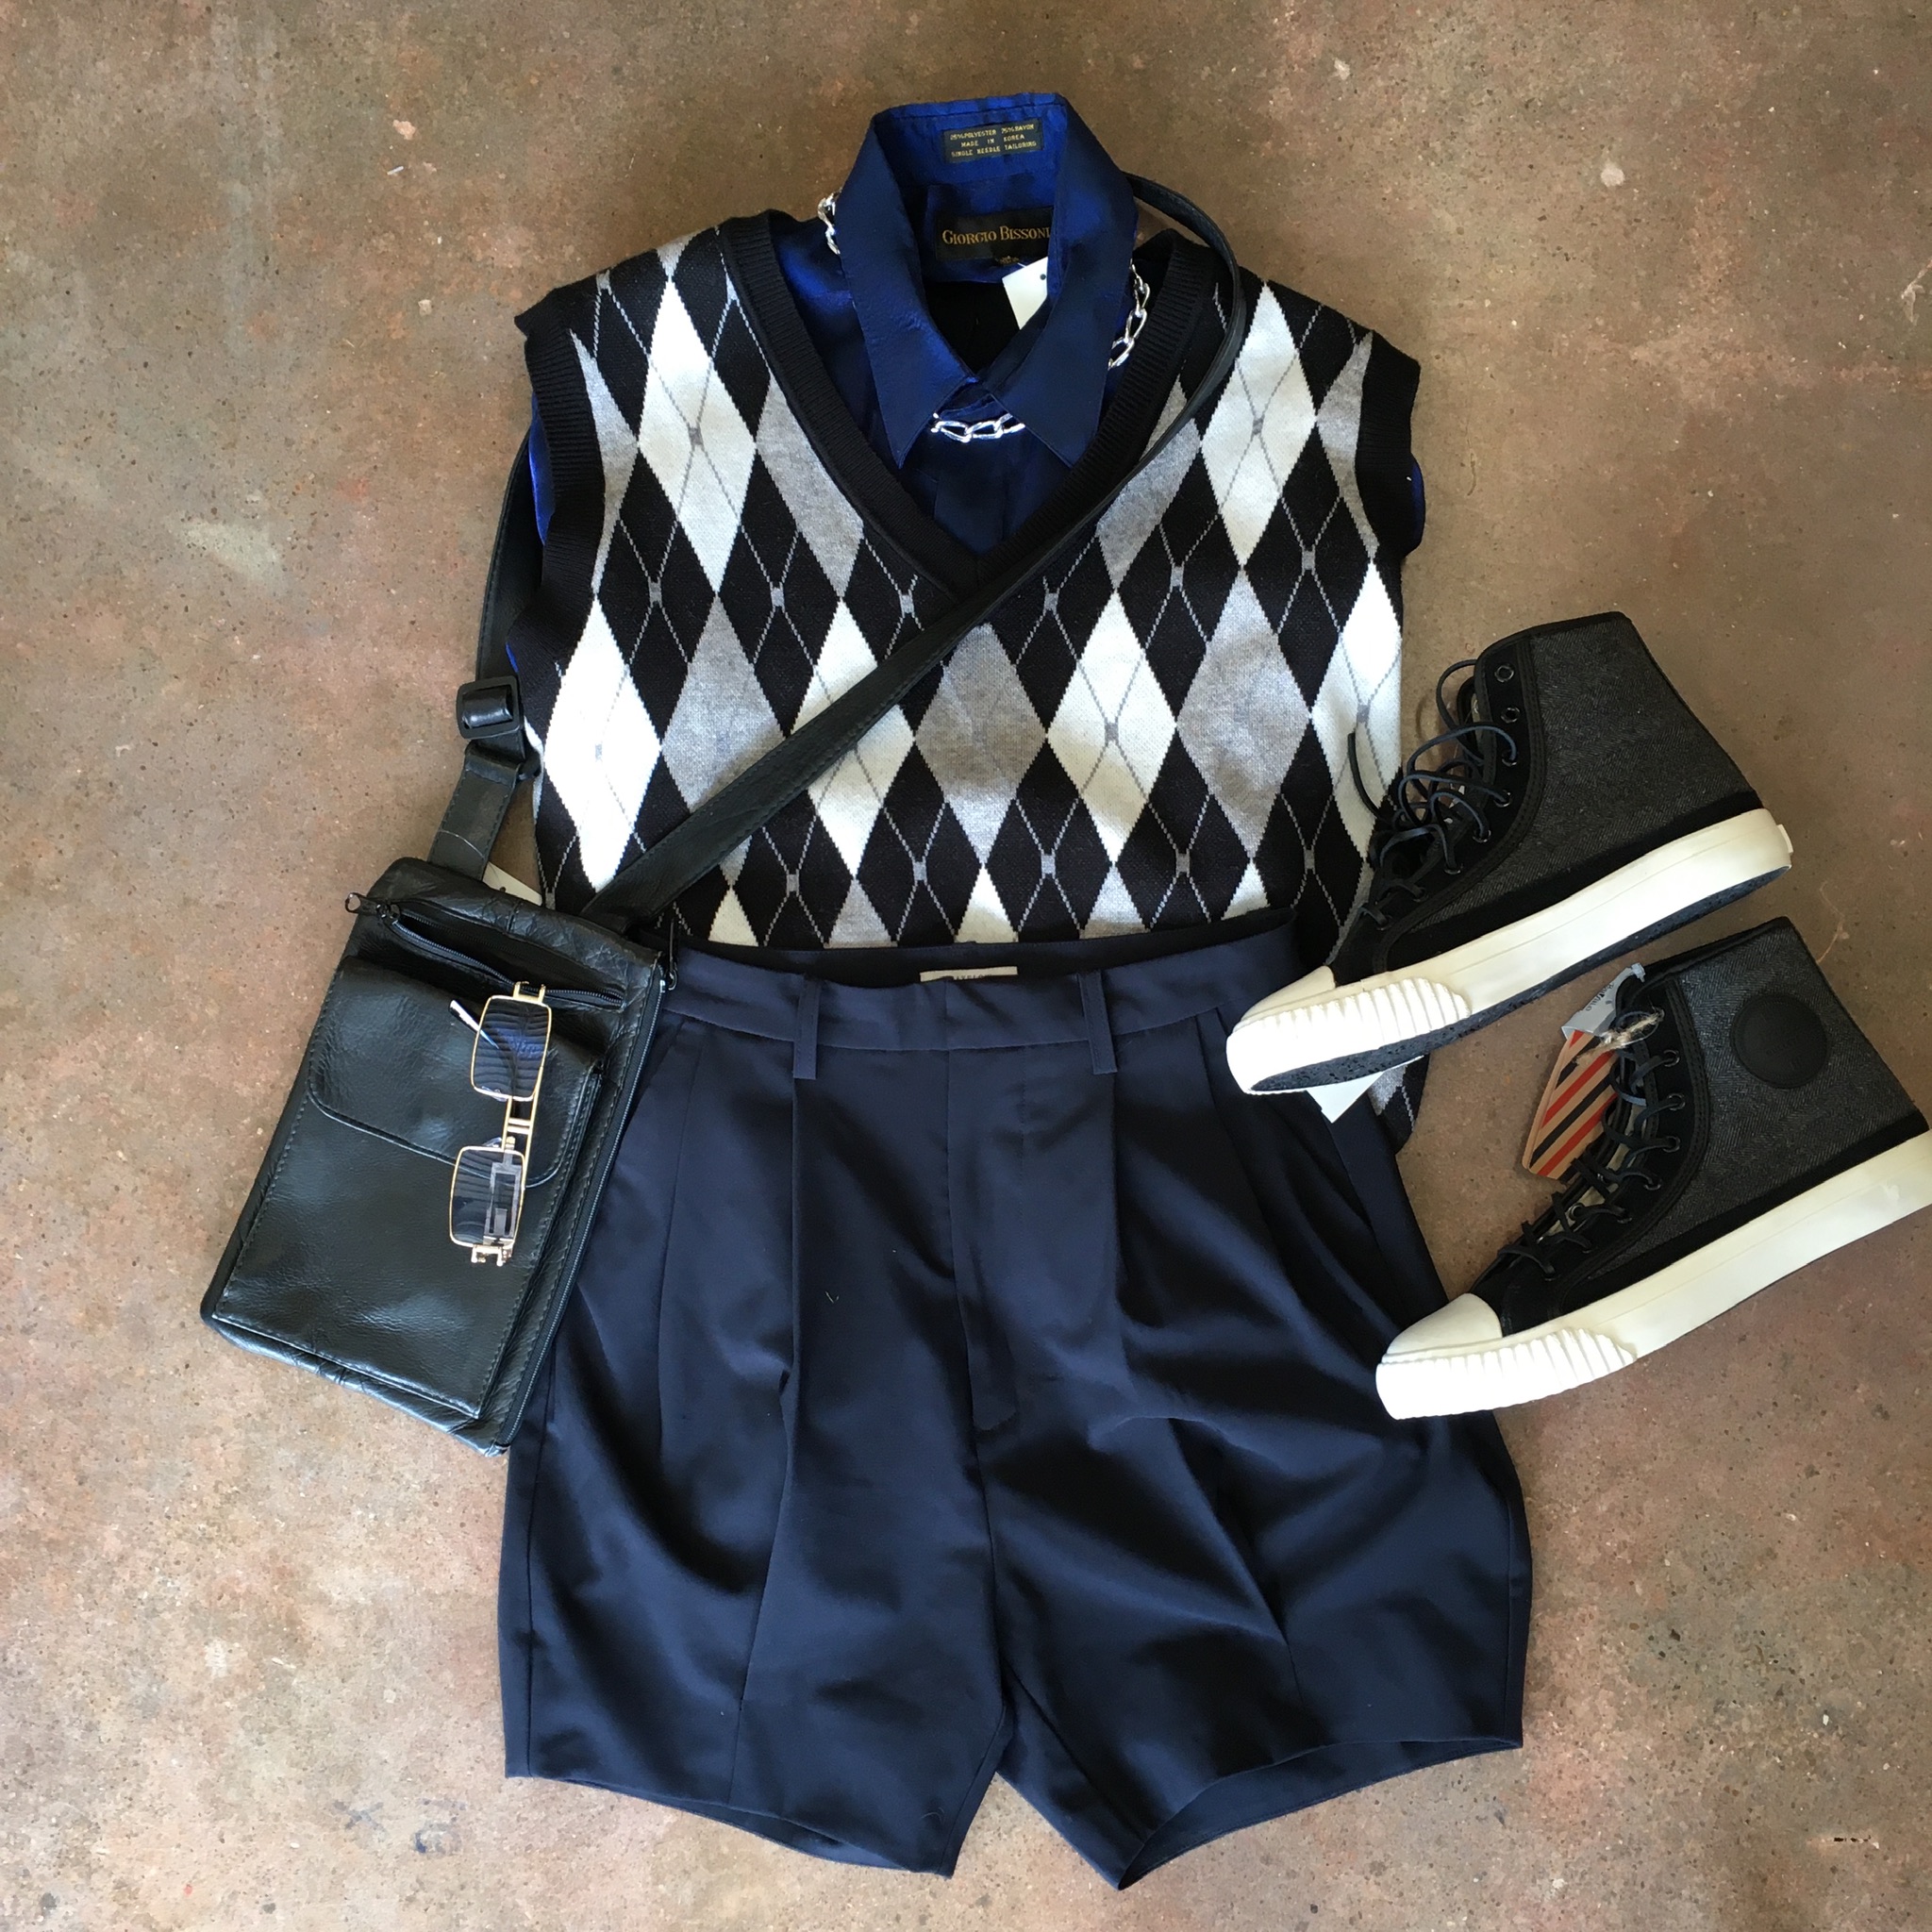 Argyle sweater vest styled with navy blue shorts and black sneakers